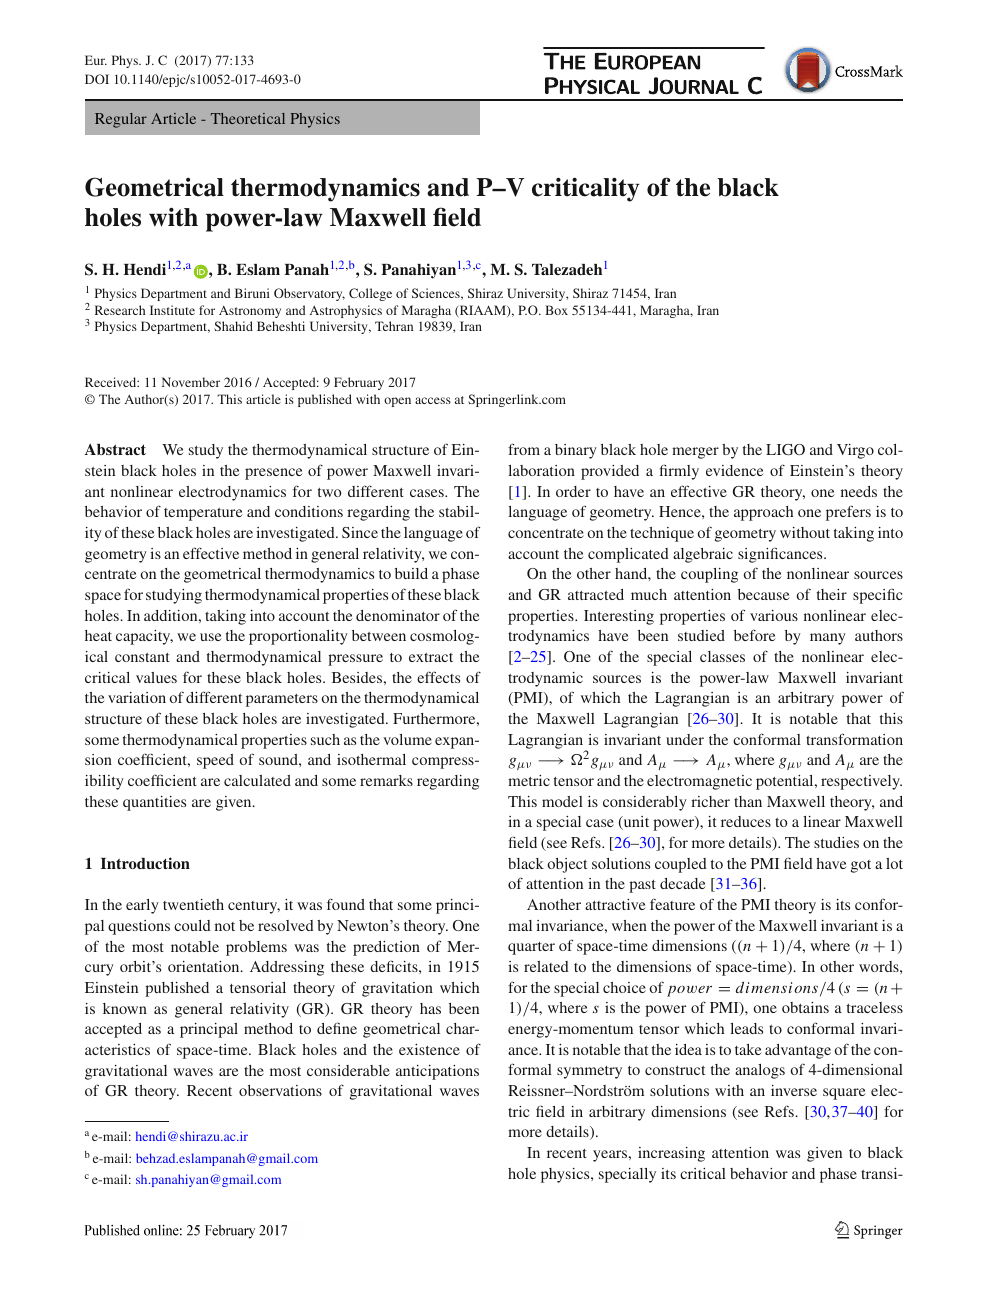 Geometrical Thermodynamics And P V Criticality Of The Black Holes With Power Law Maxwell Field Topic Of Research Paper In Physical Sciences Download Scholarly Article Pdf And Read For Free On Cyberleninka Open